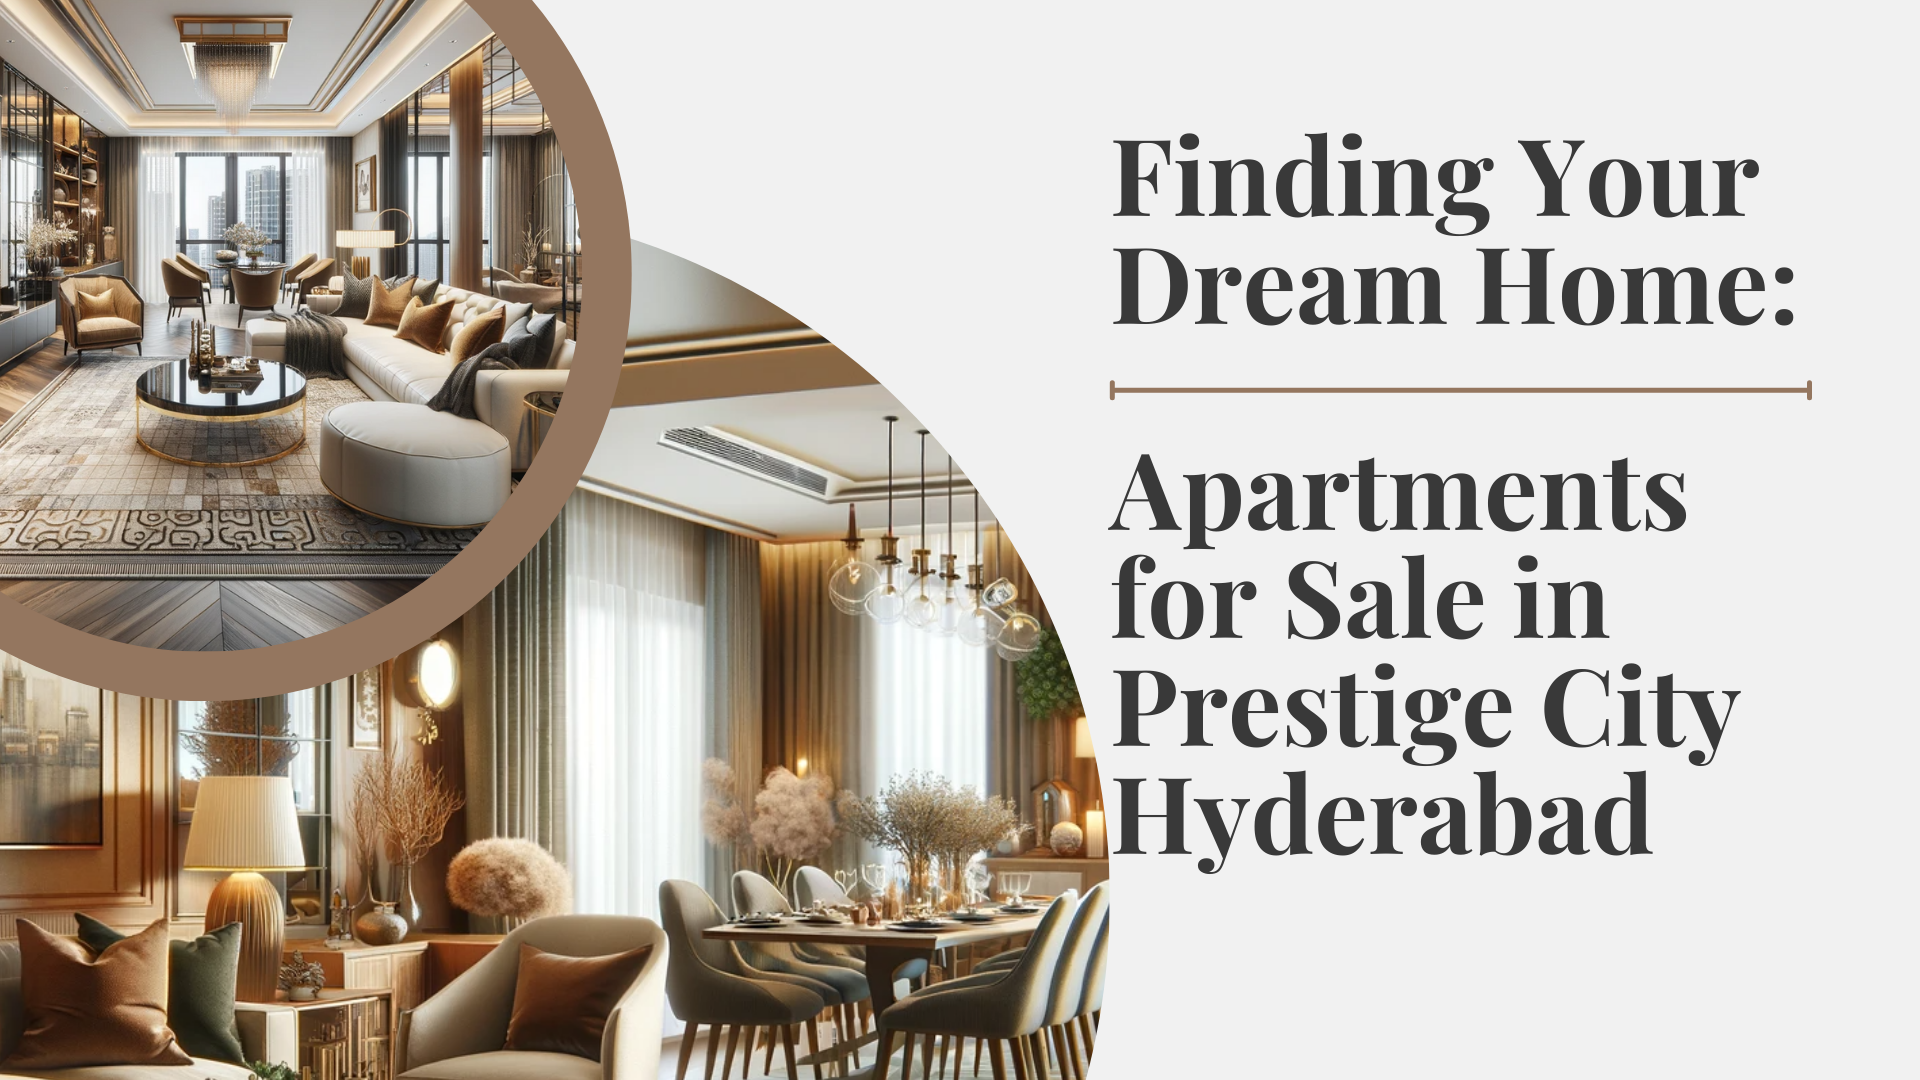 Finding Your Dream Home: Apartments for Sale in Prestige City Hyderabad